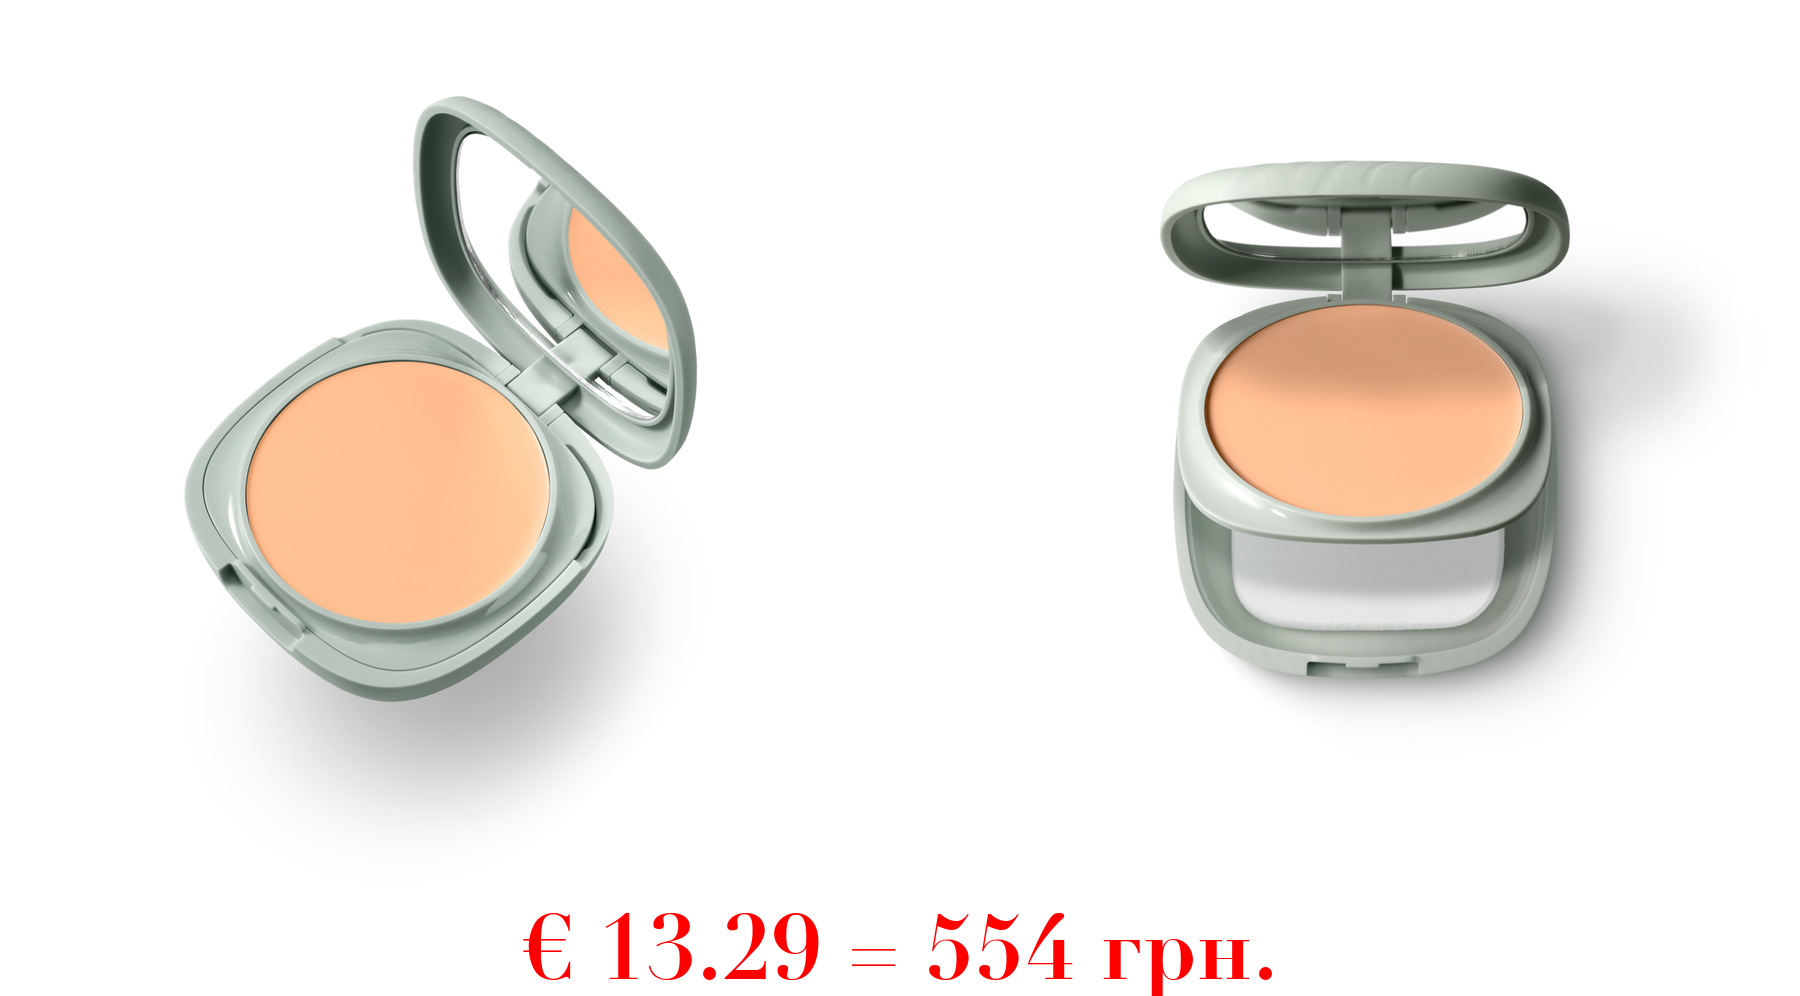 create your balance soft touch compact foundation